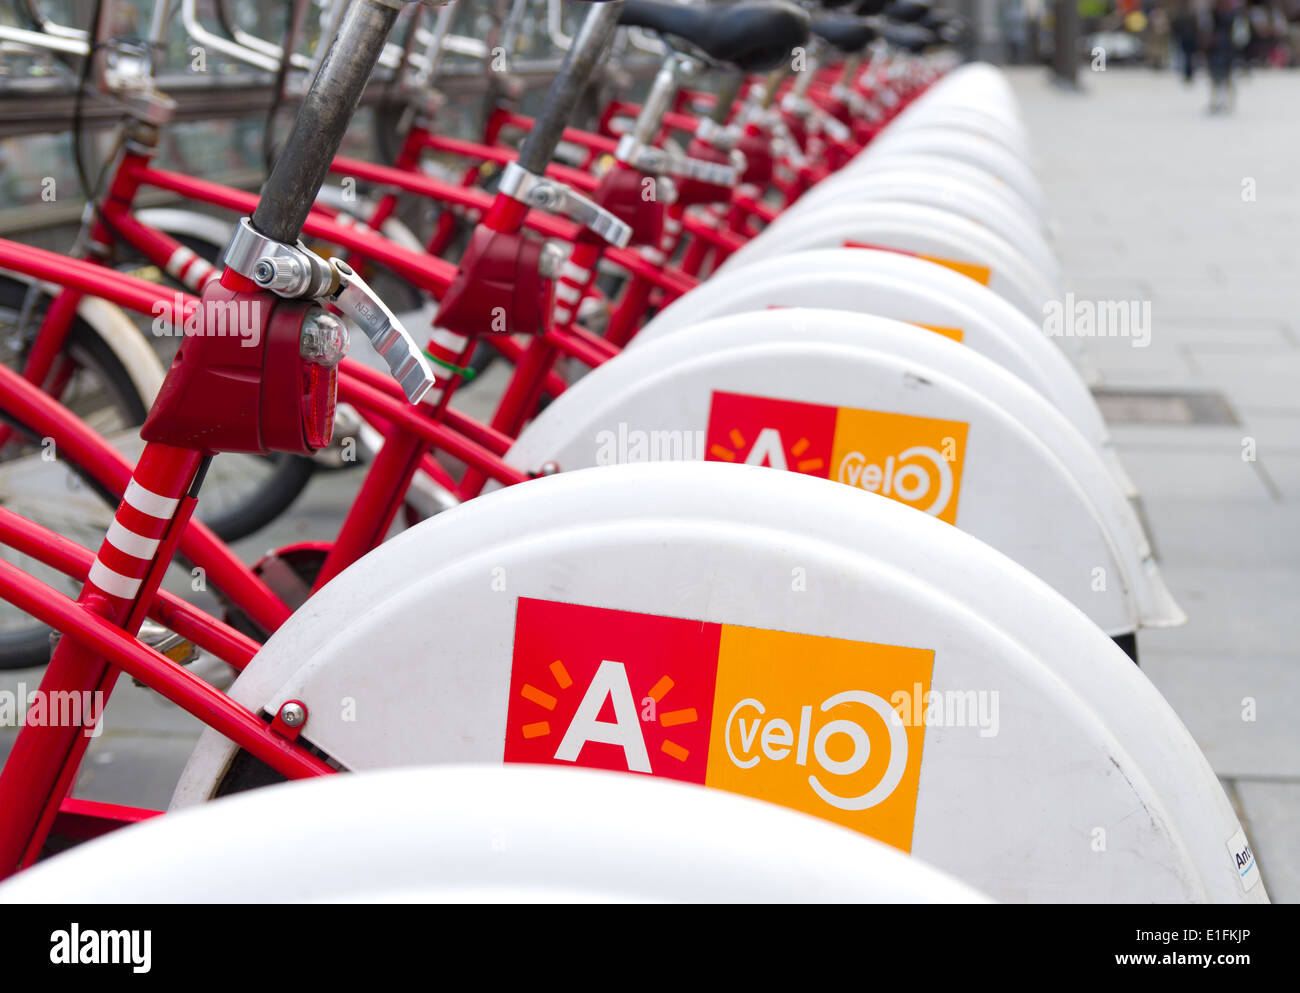 With 1000 bicycles and 80 stations, Velo is among largest bike sharing systems worldwide. Stock Photo